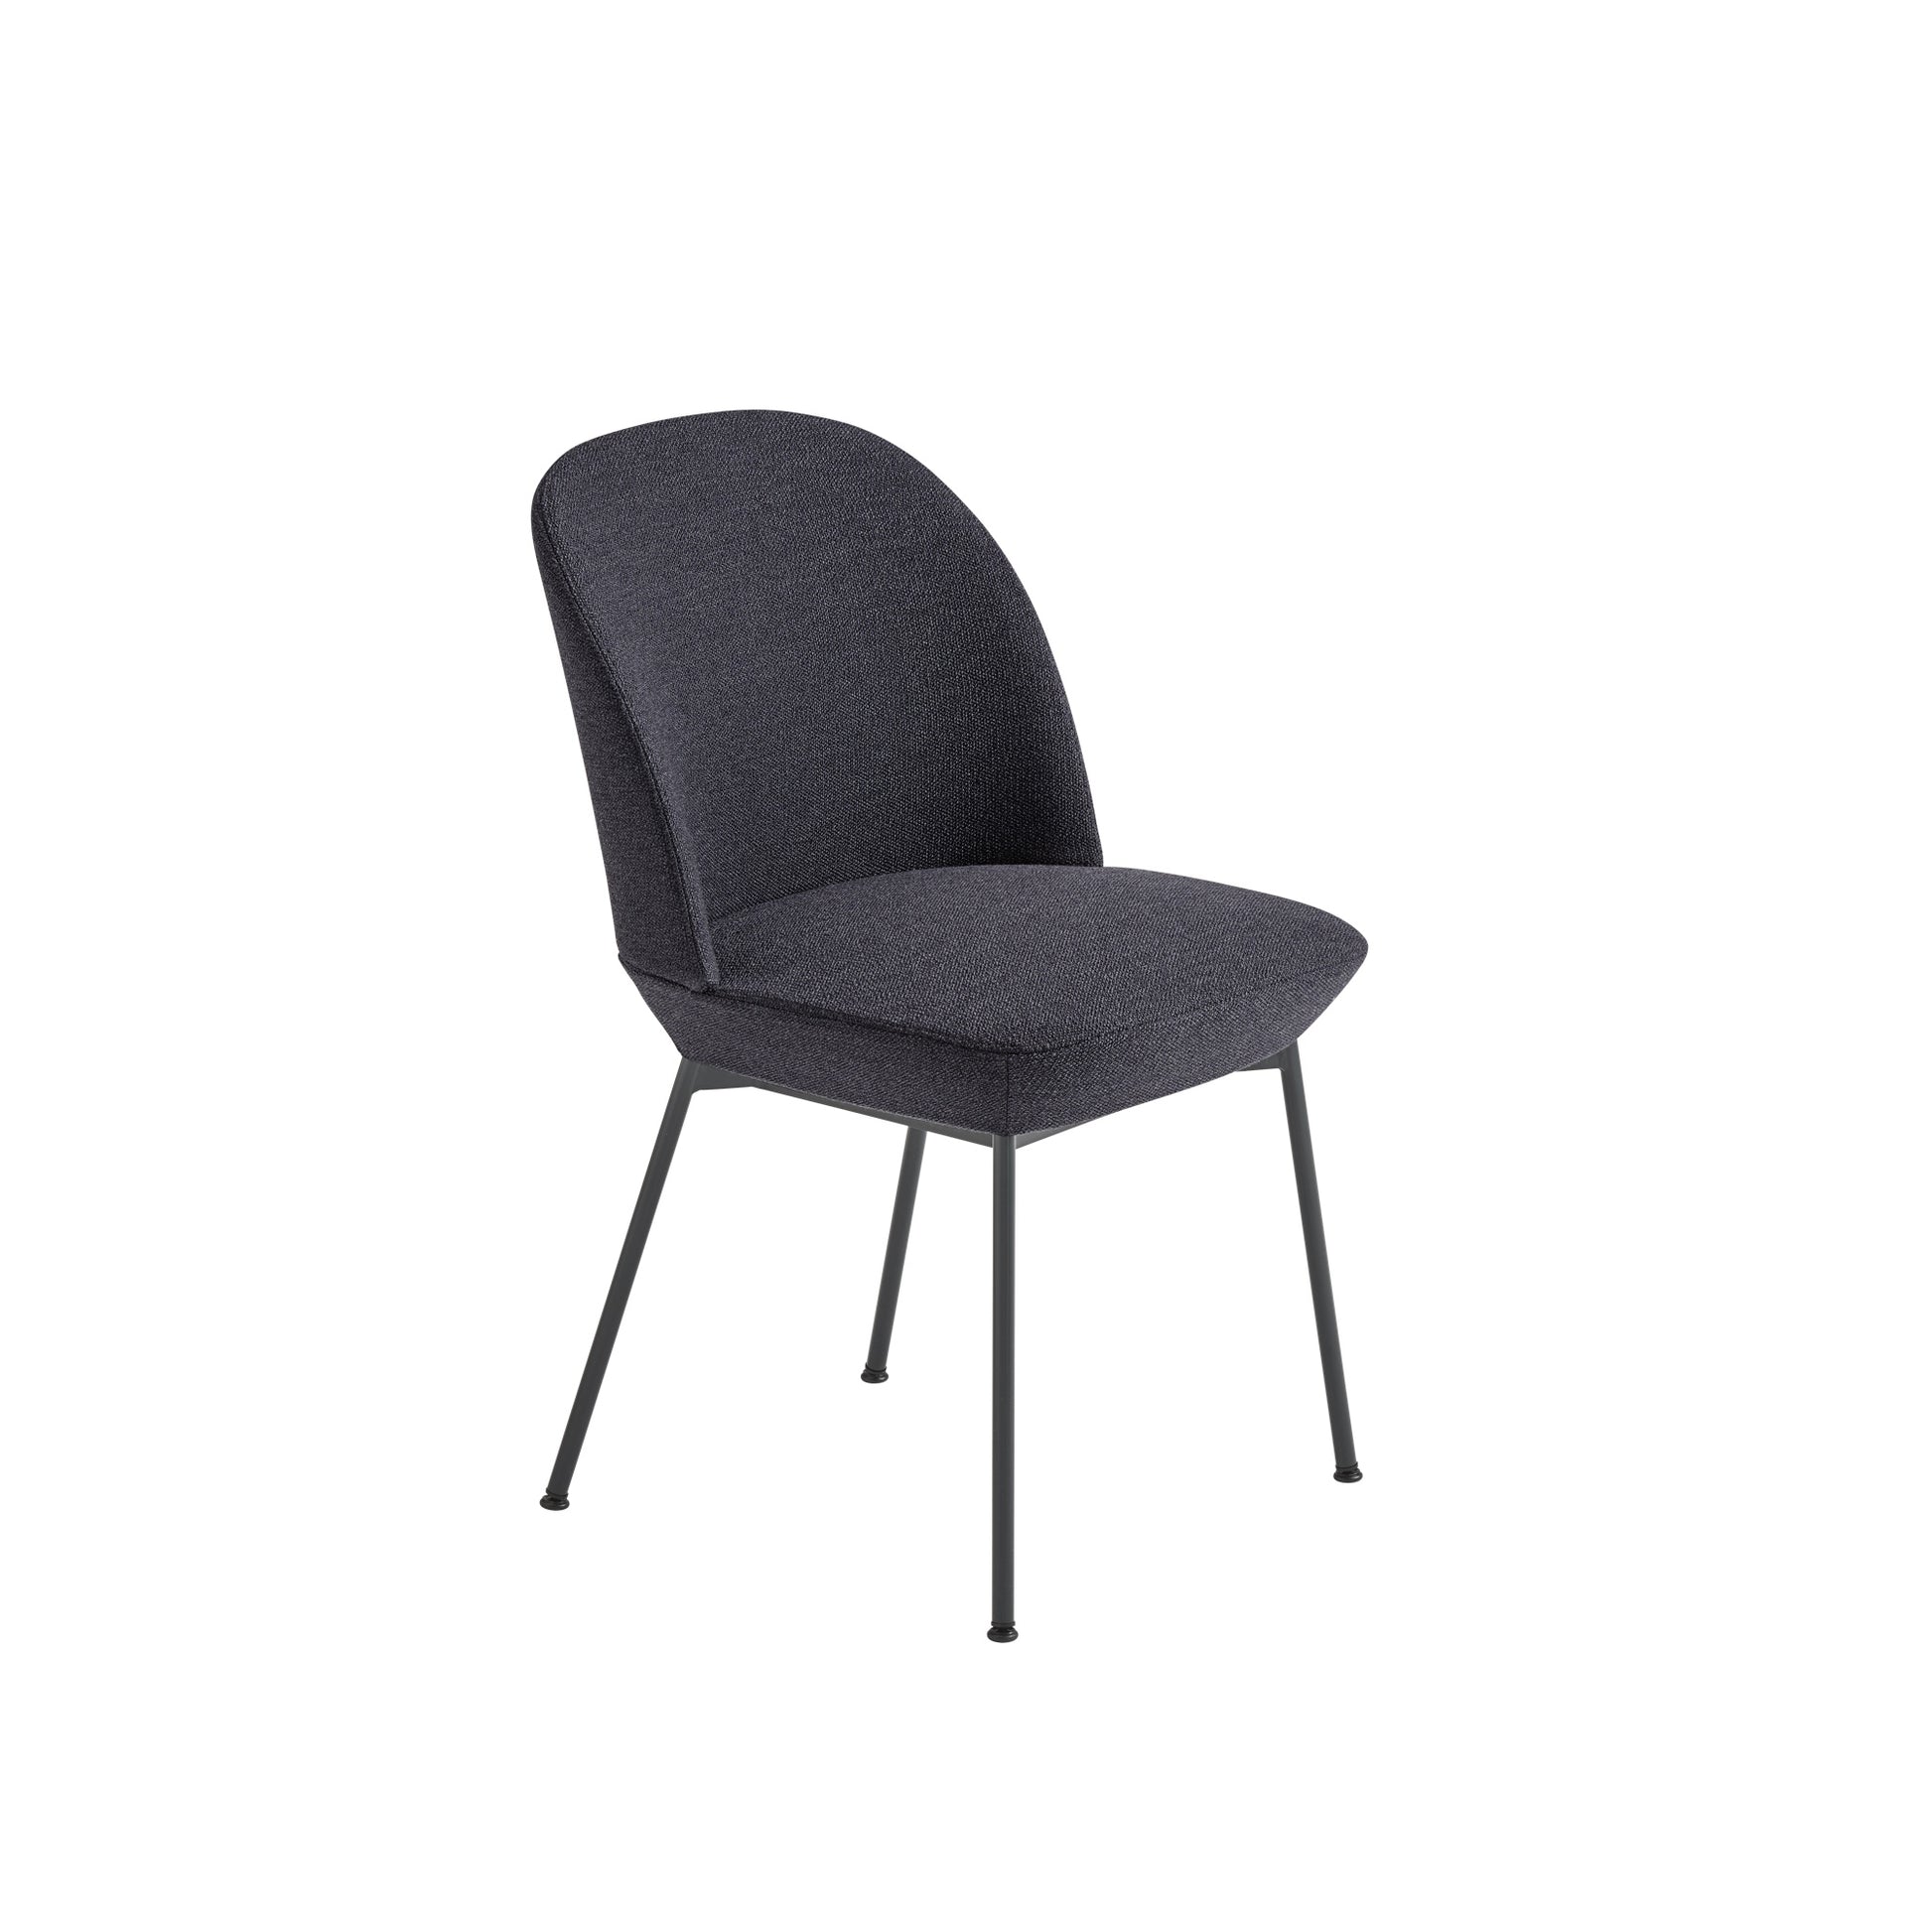 Oslo Dining Chair Upholstered by Muuto #Ocean 601/Anthracite Black